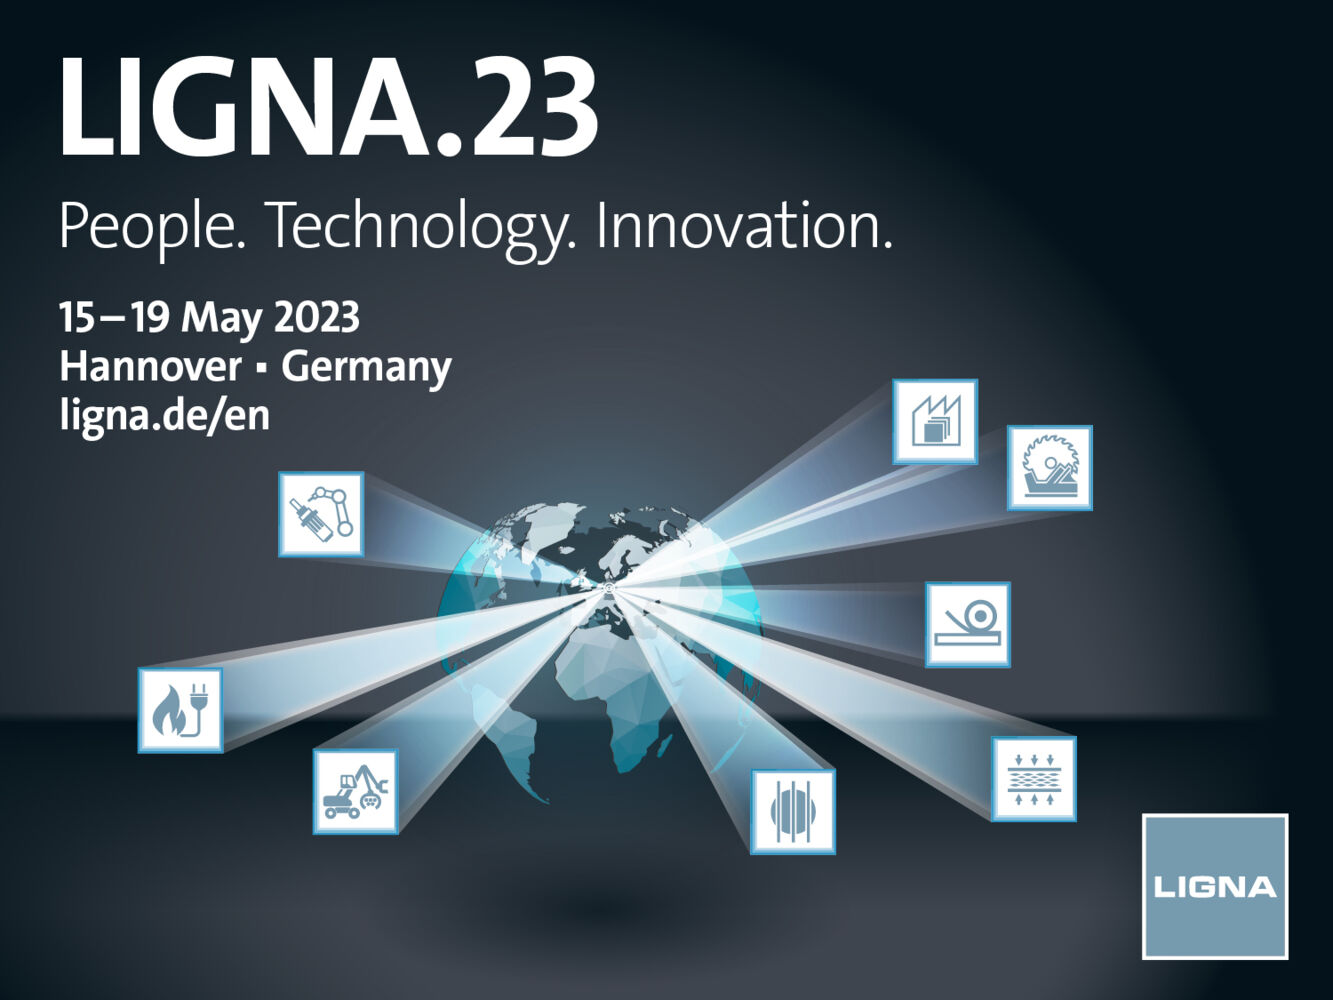 LIGNA 2023: SCM'S INNOVATIONS UNDER THE SIGN OF AUTOMATION AND DIGITAL TRANSFORMATION